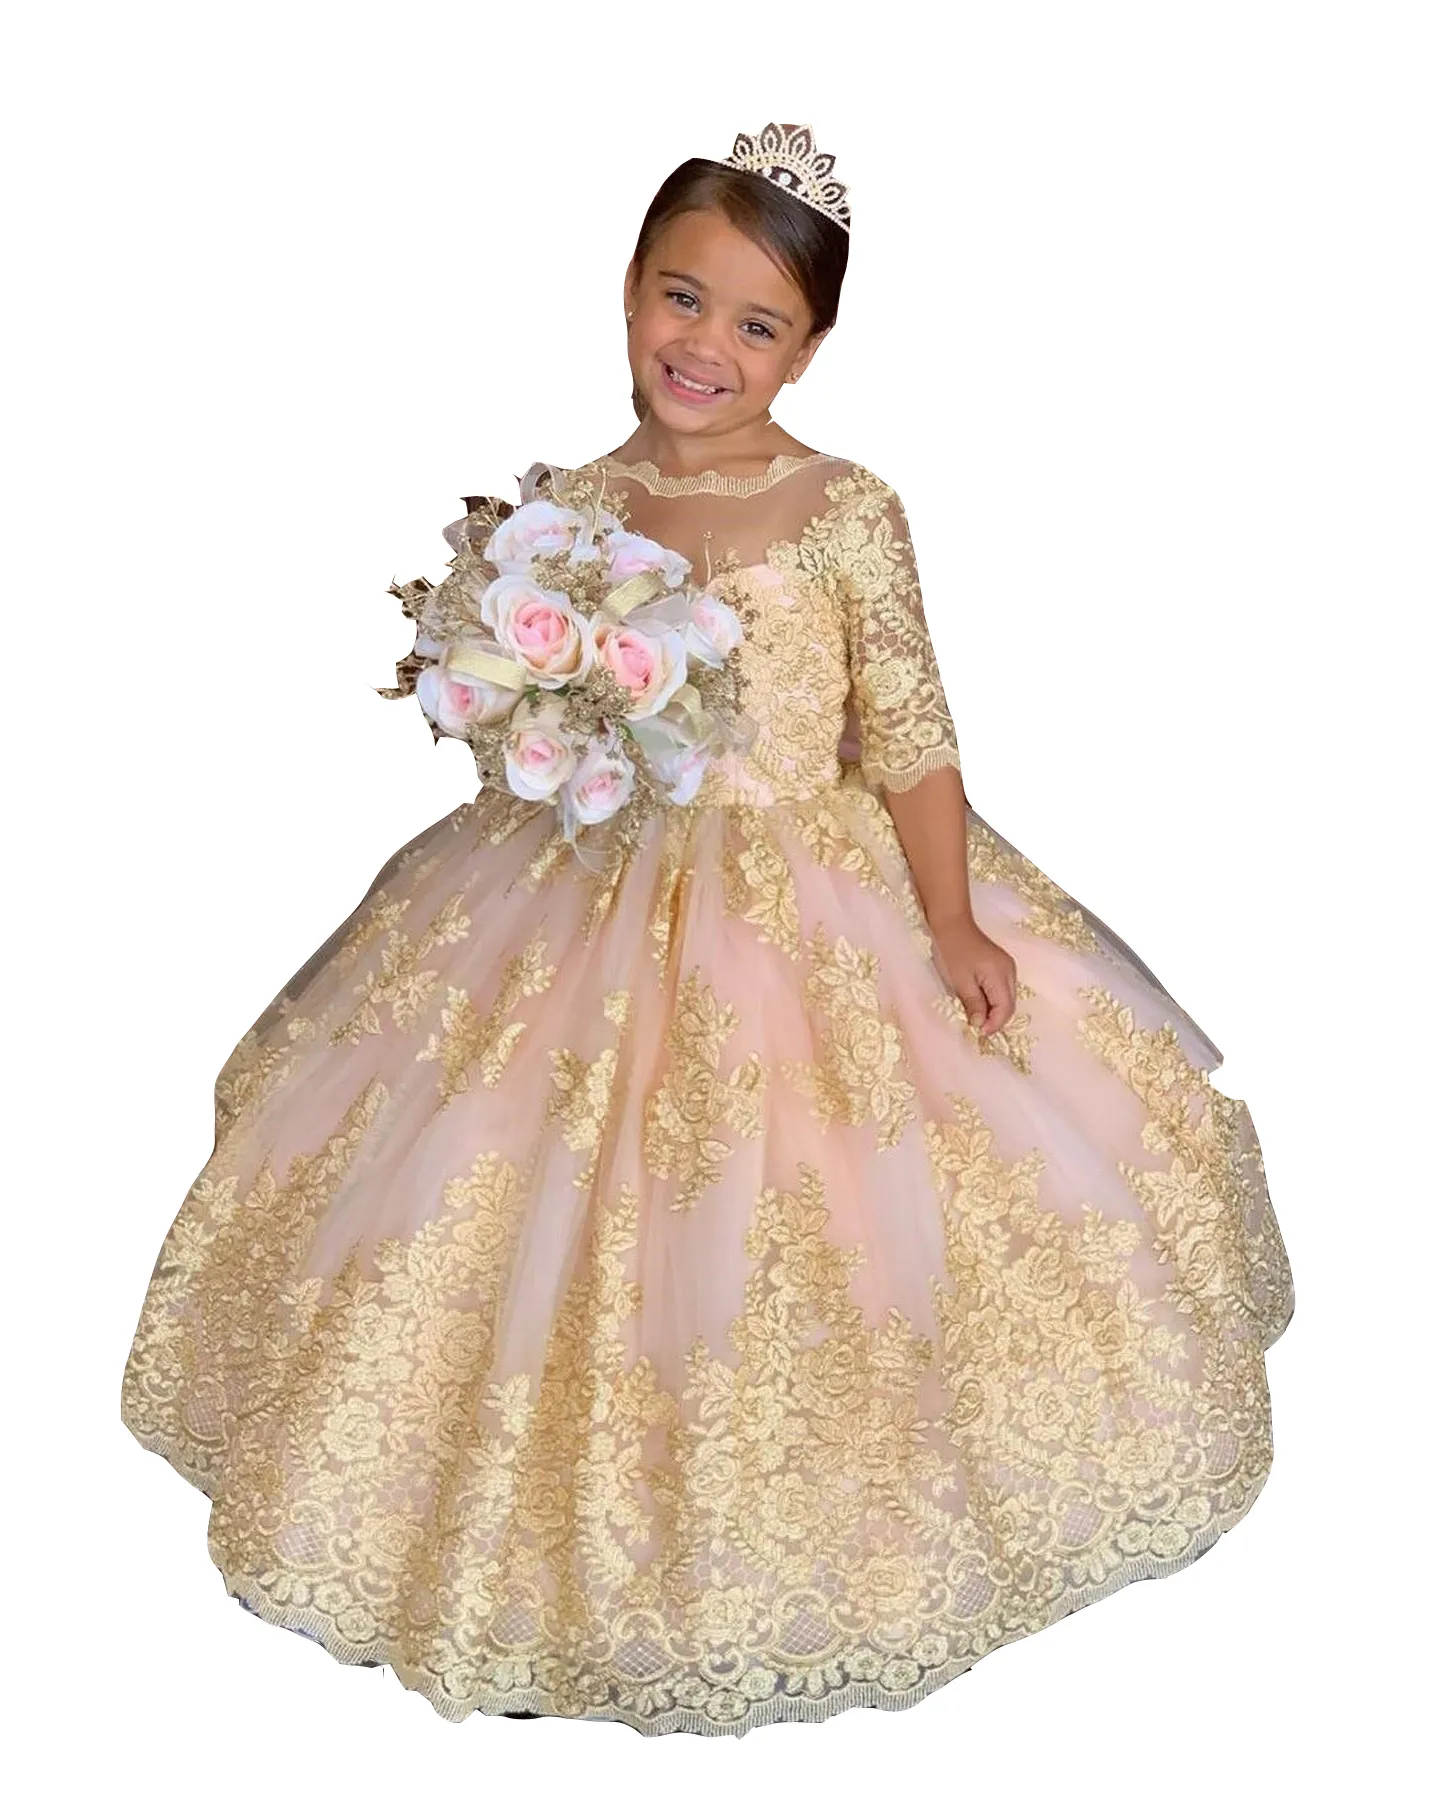 2023 Lovely Ball Gown Flower Girls Dresses Pink Gold Lace Appliques Beads Half Sleeves Kids Birthday Party Dress Flower Child Prom Gown With Bow